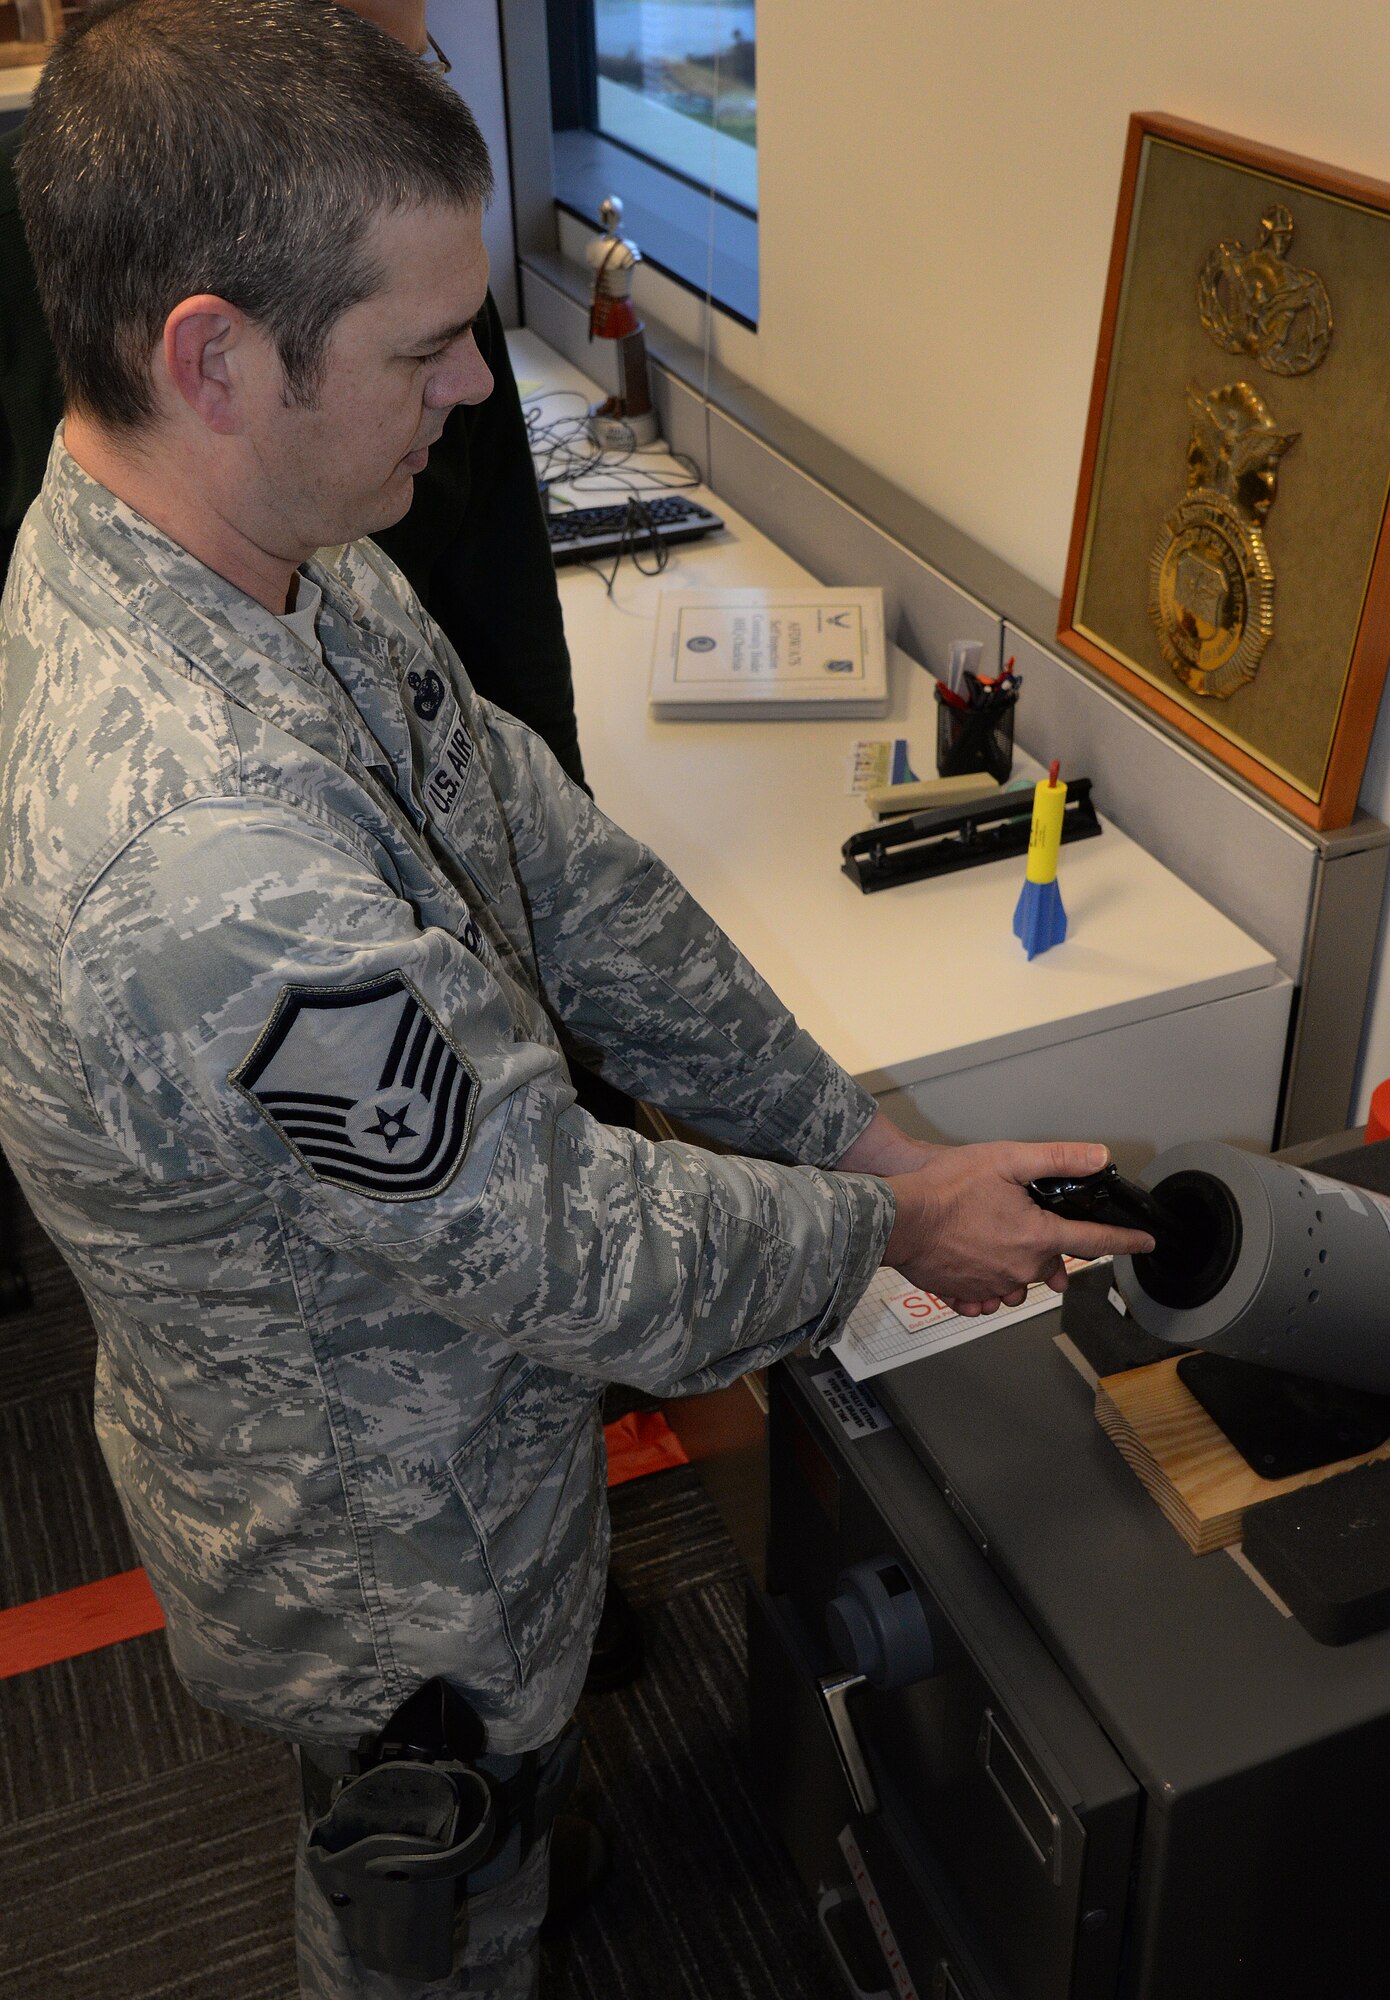 Master Sgt. Chris Romano, Air Force District of Washington Security Forces Plans and Programs Branch superintendent, clears his M9 service pistol at the William A. Jones III building on Joint Base Andrews, Md., Dec. 30, 2015. Staff arming allows AFDW personnel with an SF background to be armed in the building while working in a staff position to prevent active shooter threats. (U.S. Air Force photo/1st Lt. Esther Willett)